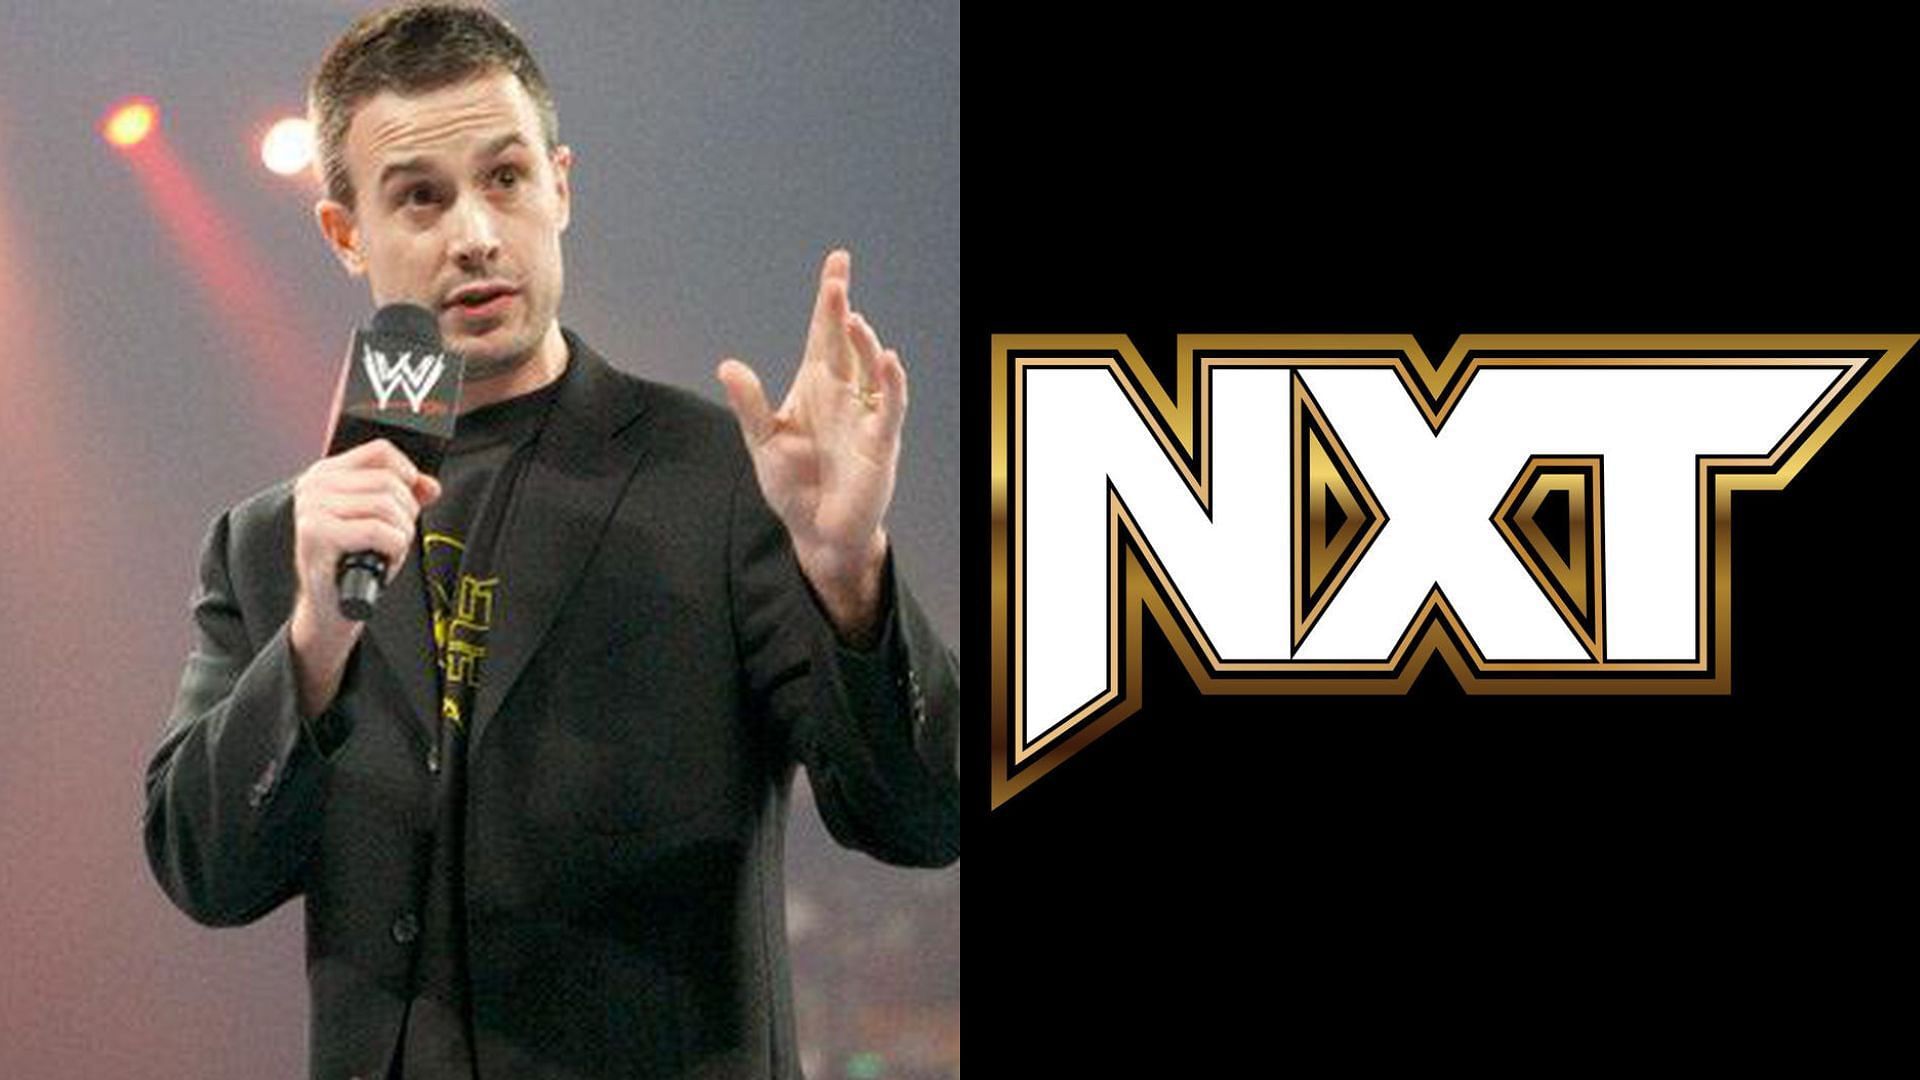 Former WWE writer Freddie Prinze Jr. shared his thoughts on NXT